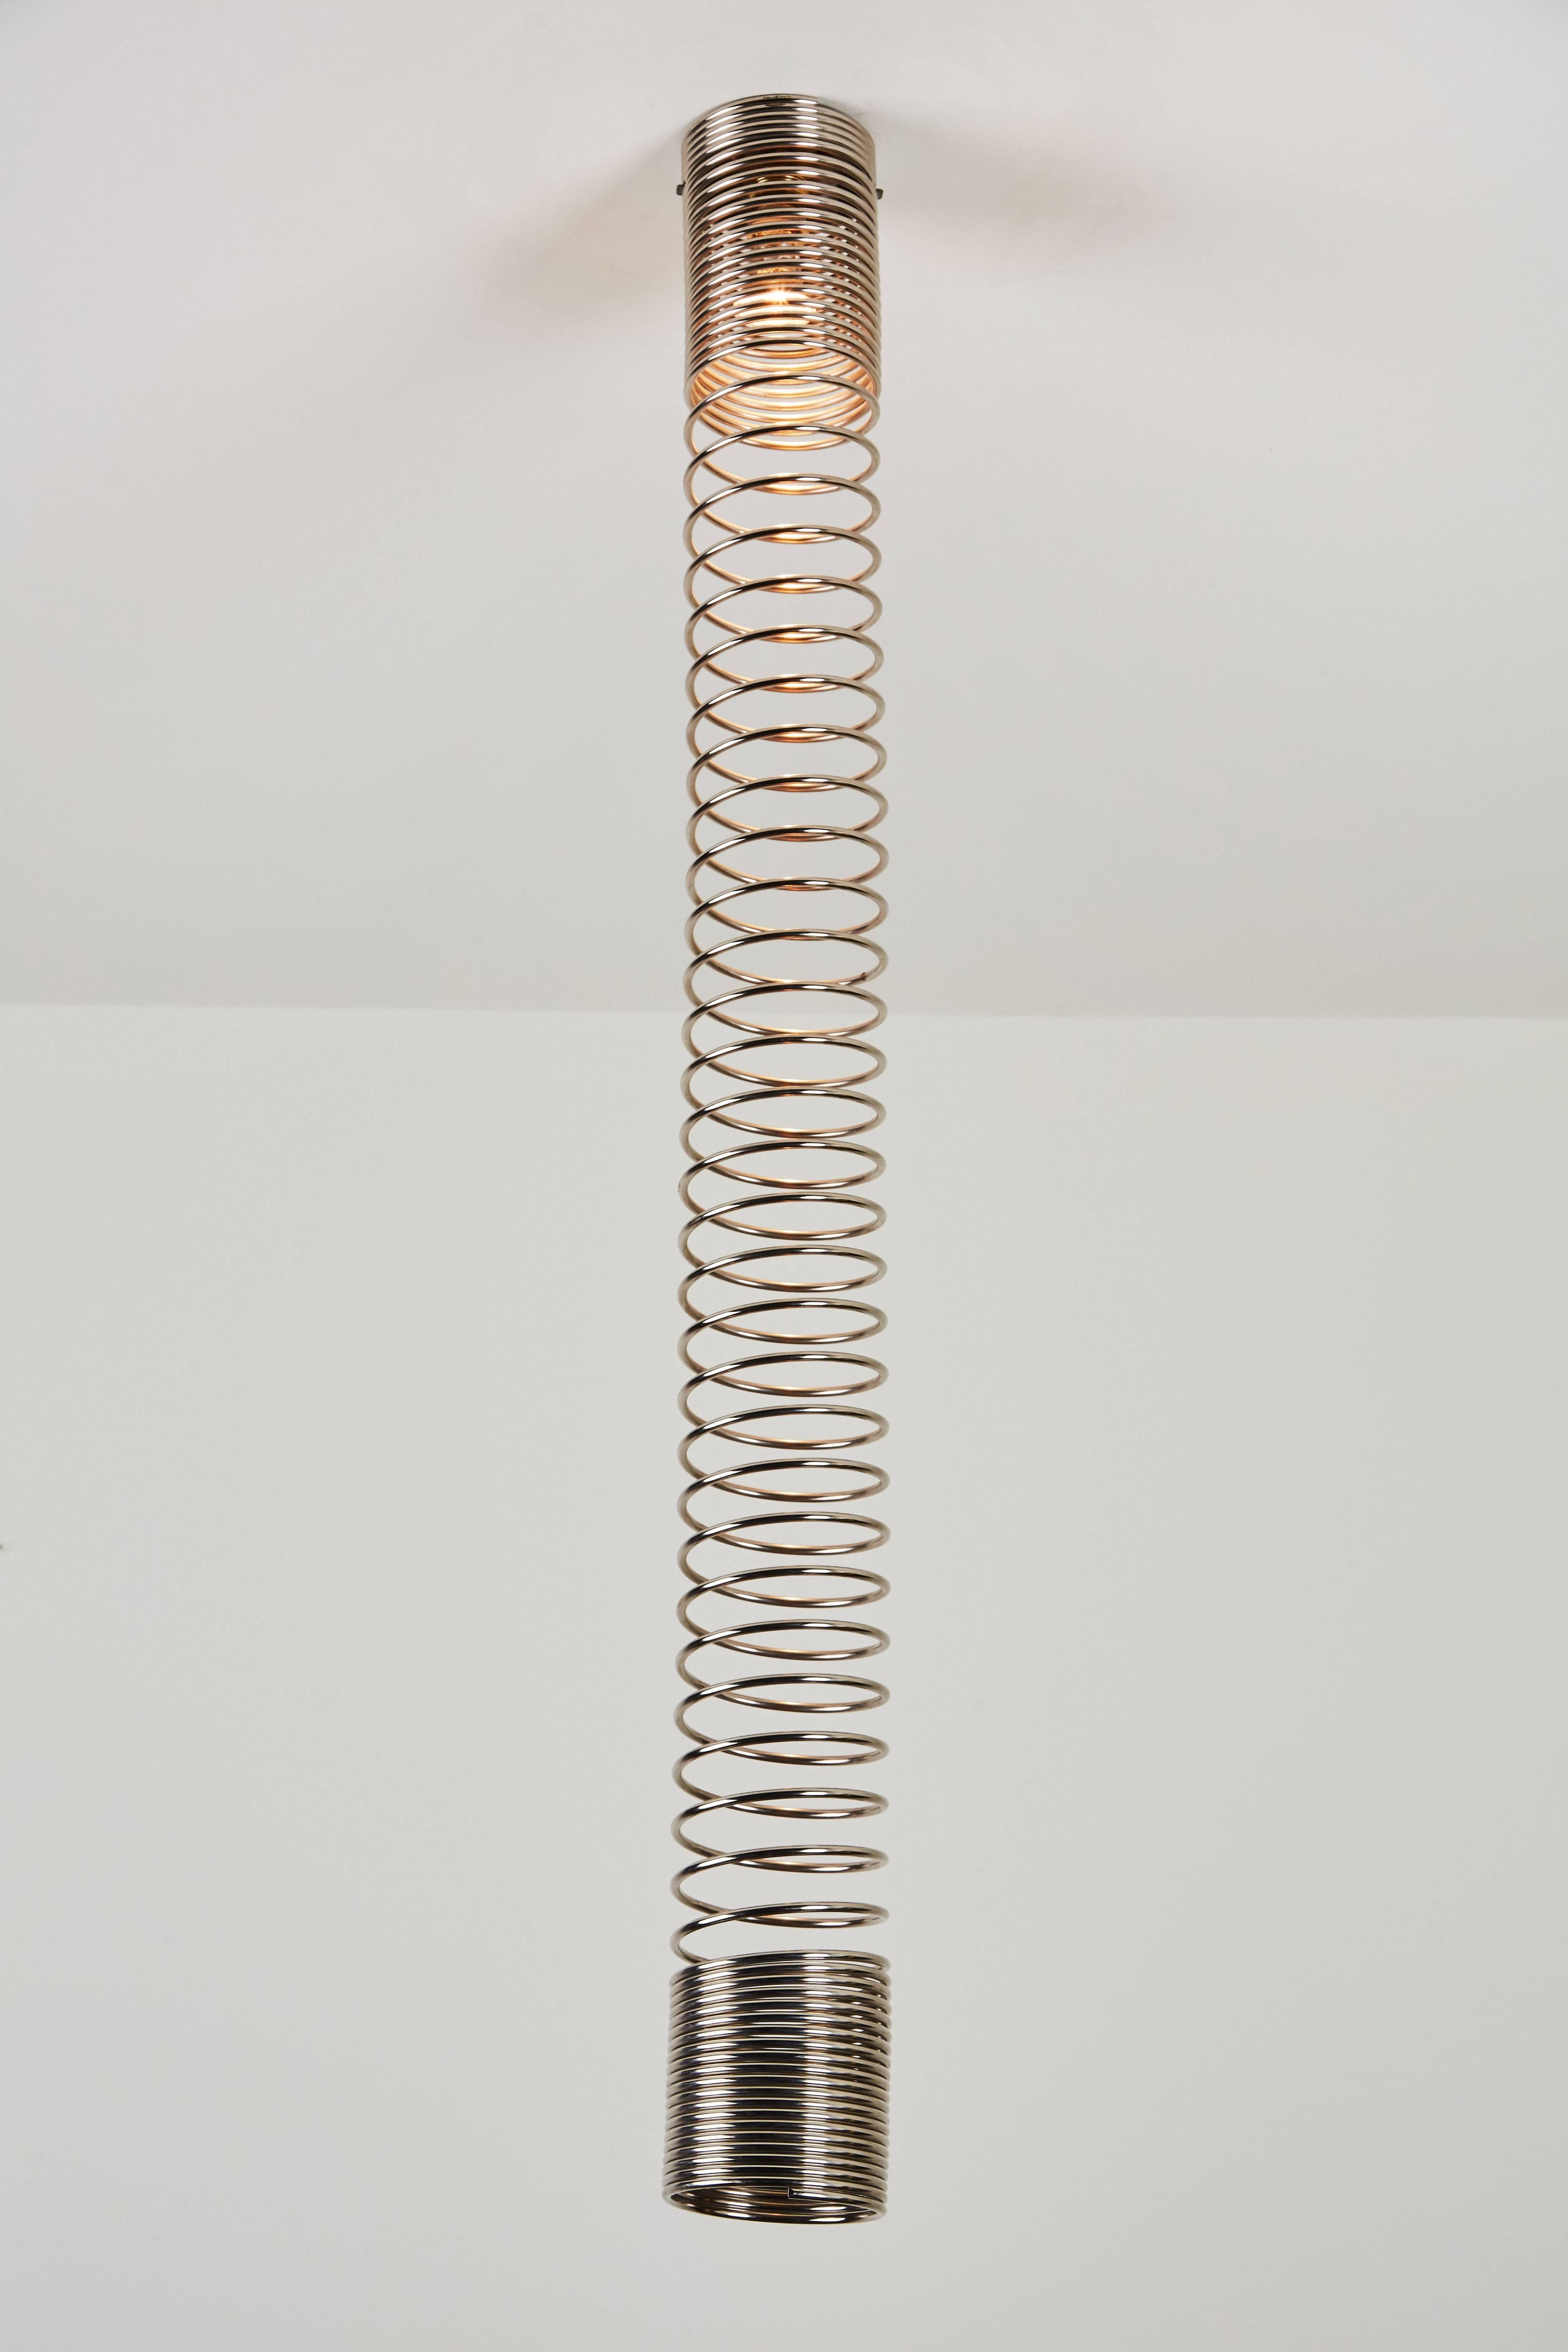 Italian Collection of Spirali Lights by Angelo Mangiarotti For Sale